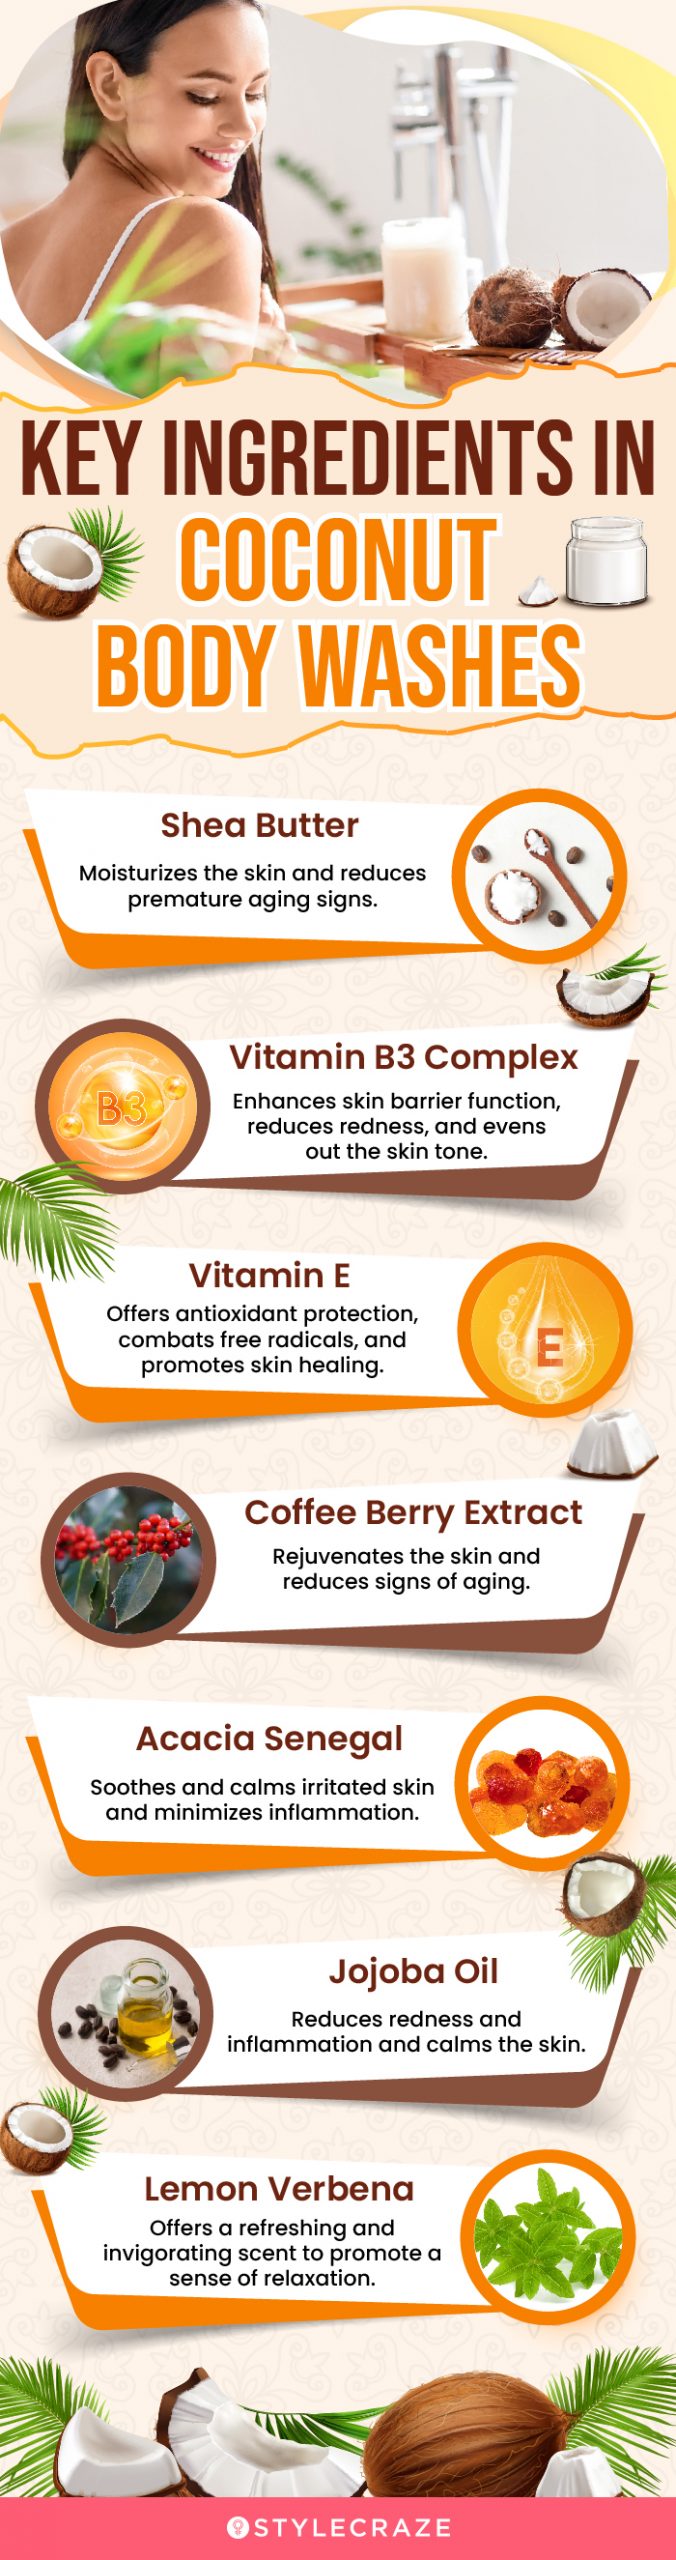 Key Ingredients In Coconut Body Washes (infographic)